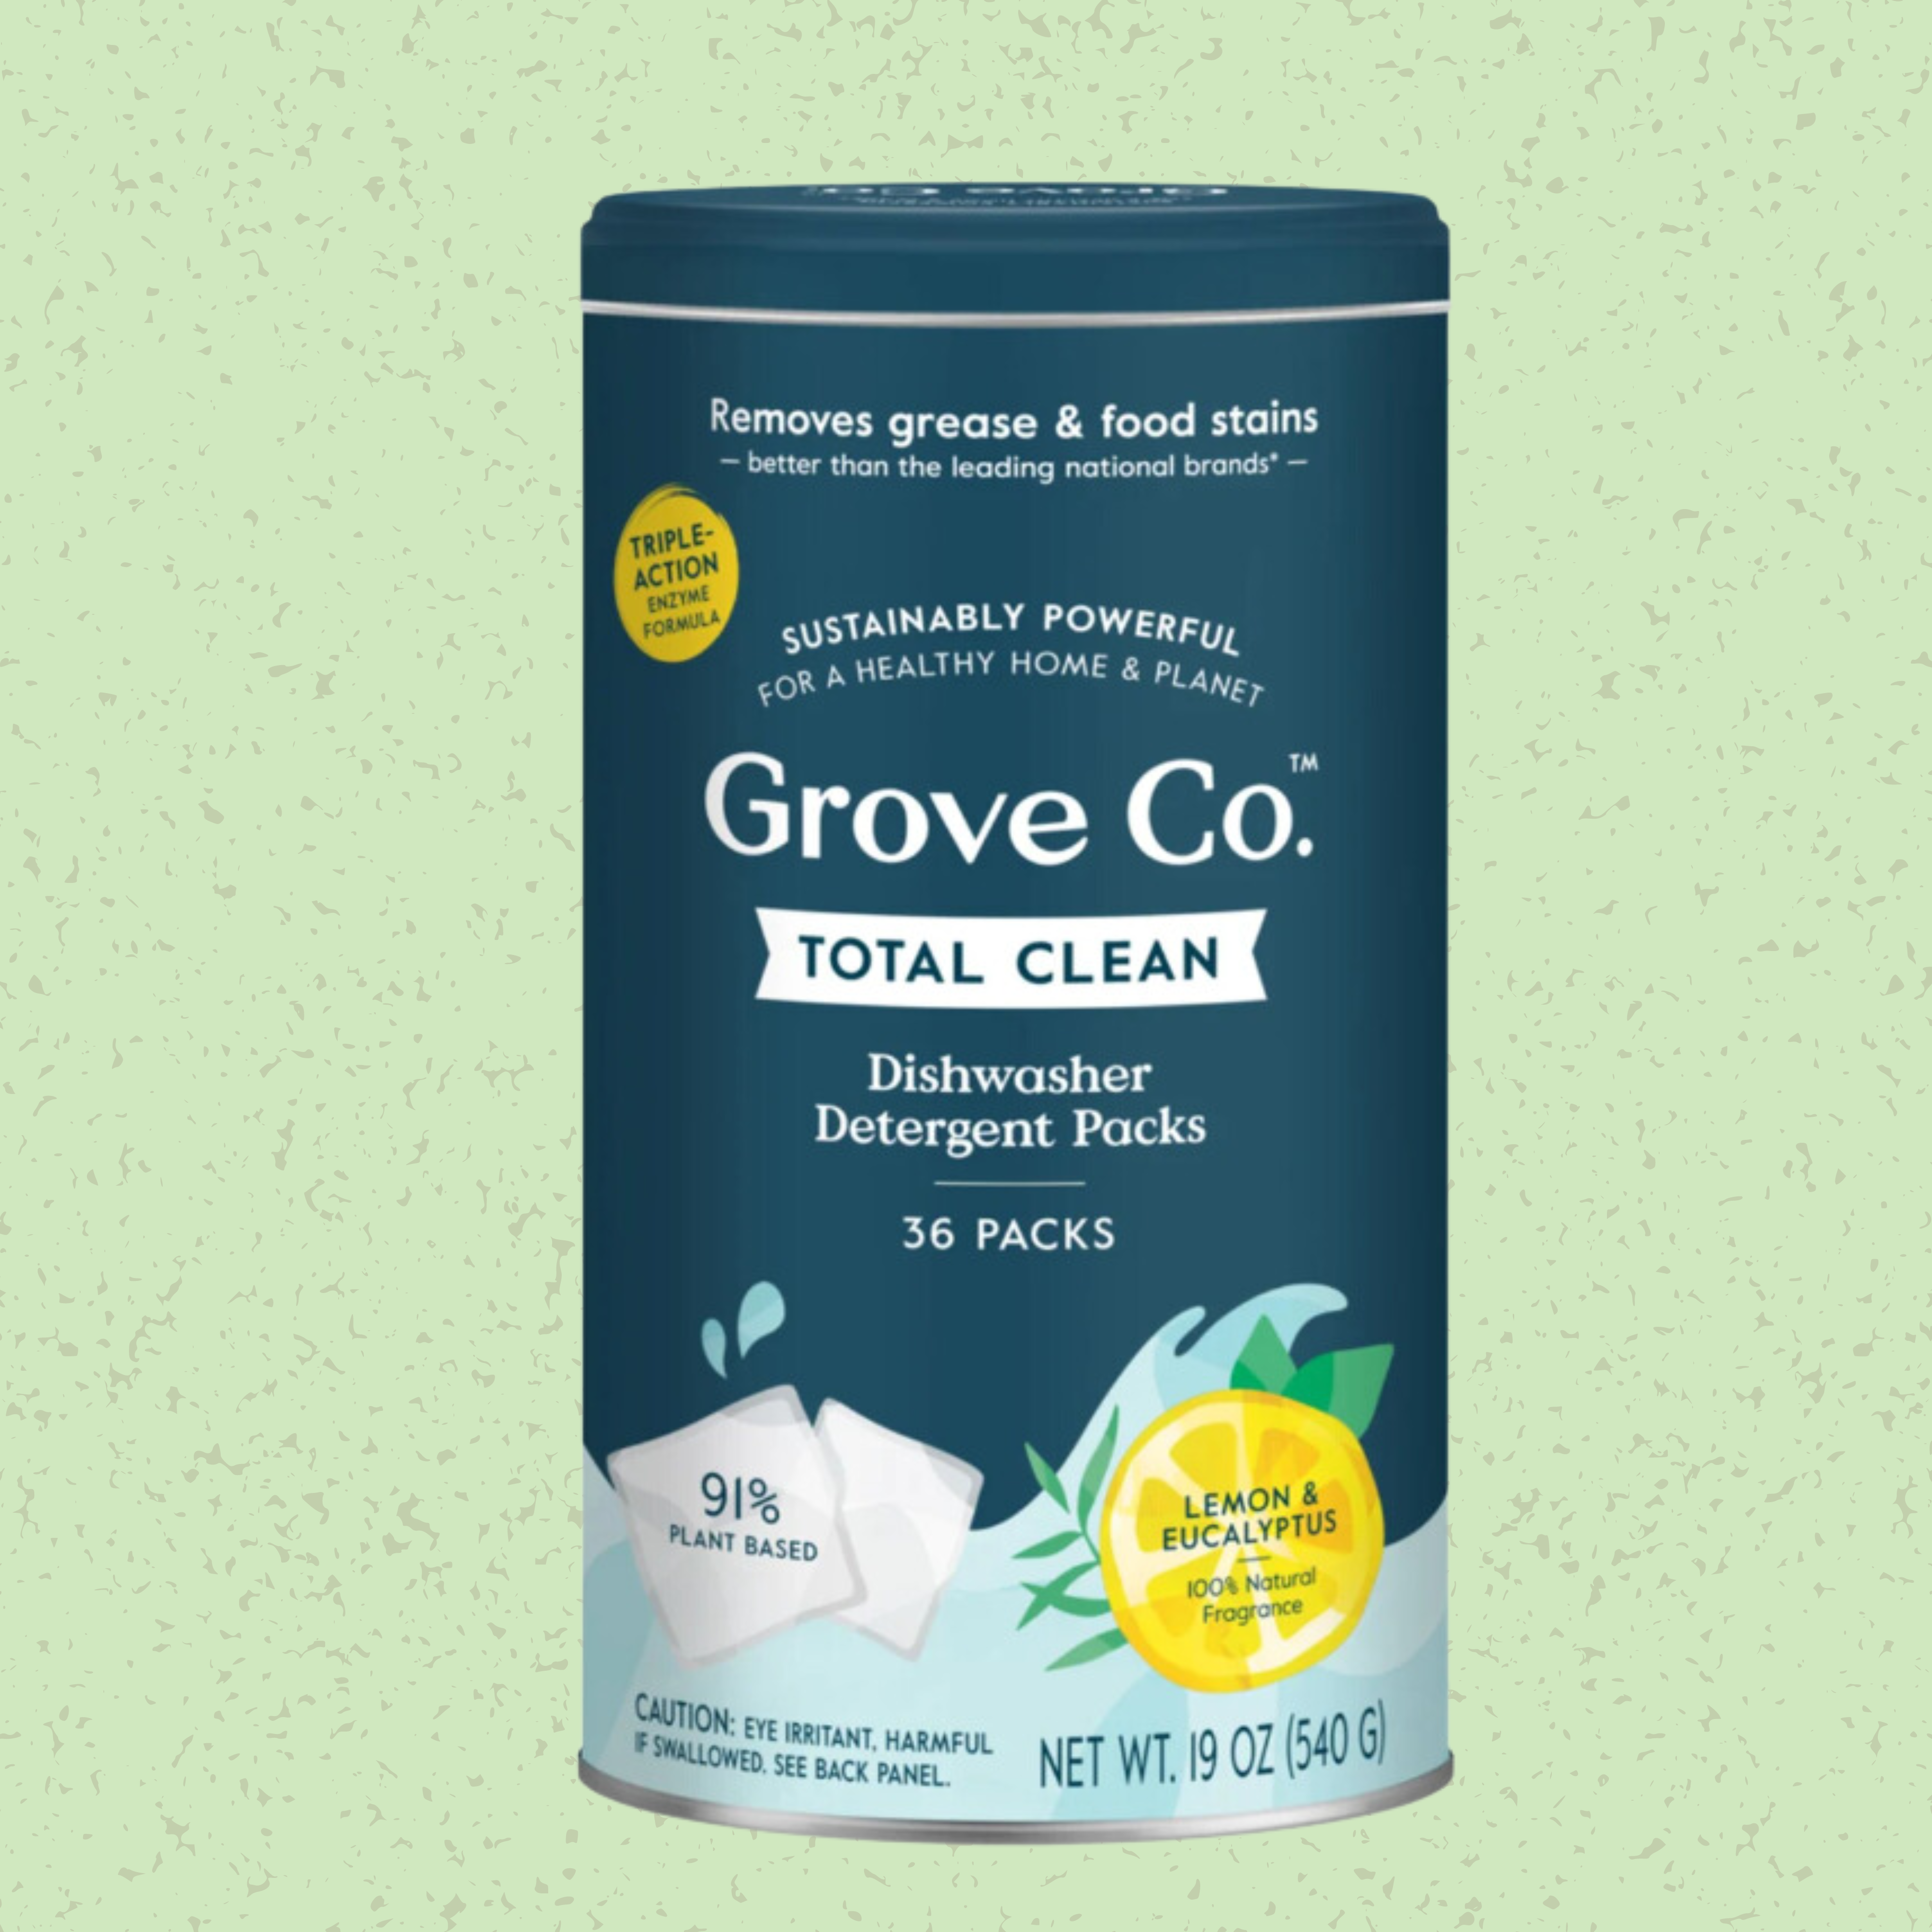 Grove Collaborative: 8 Of The Best Zero Waste Dishwasher Detergent Options You Need to Try Now